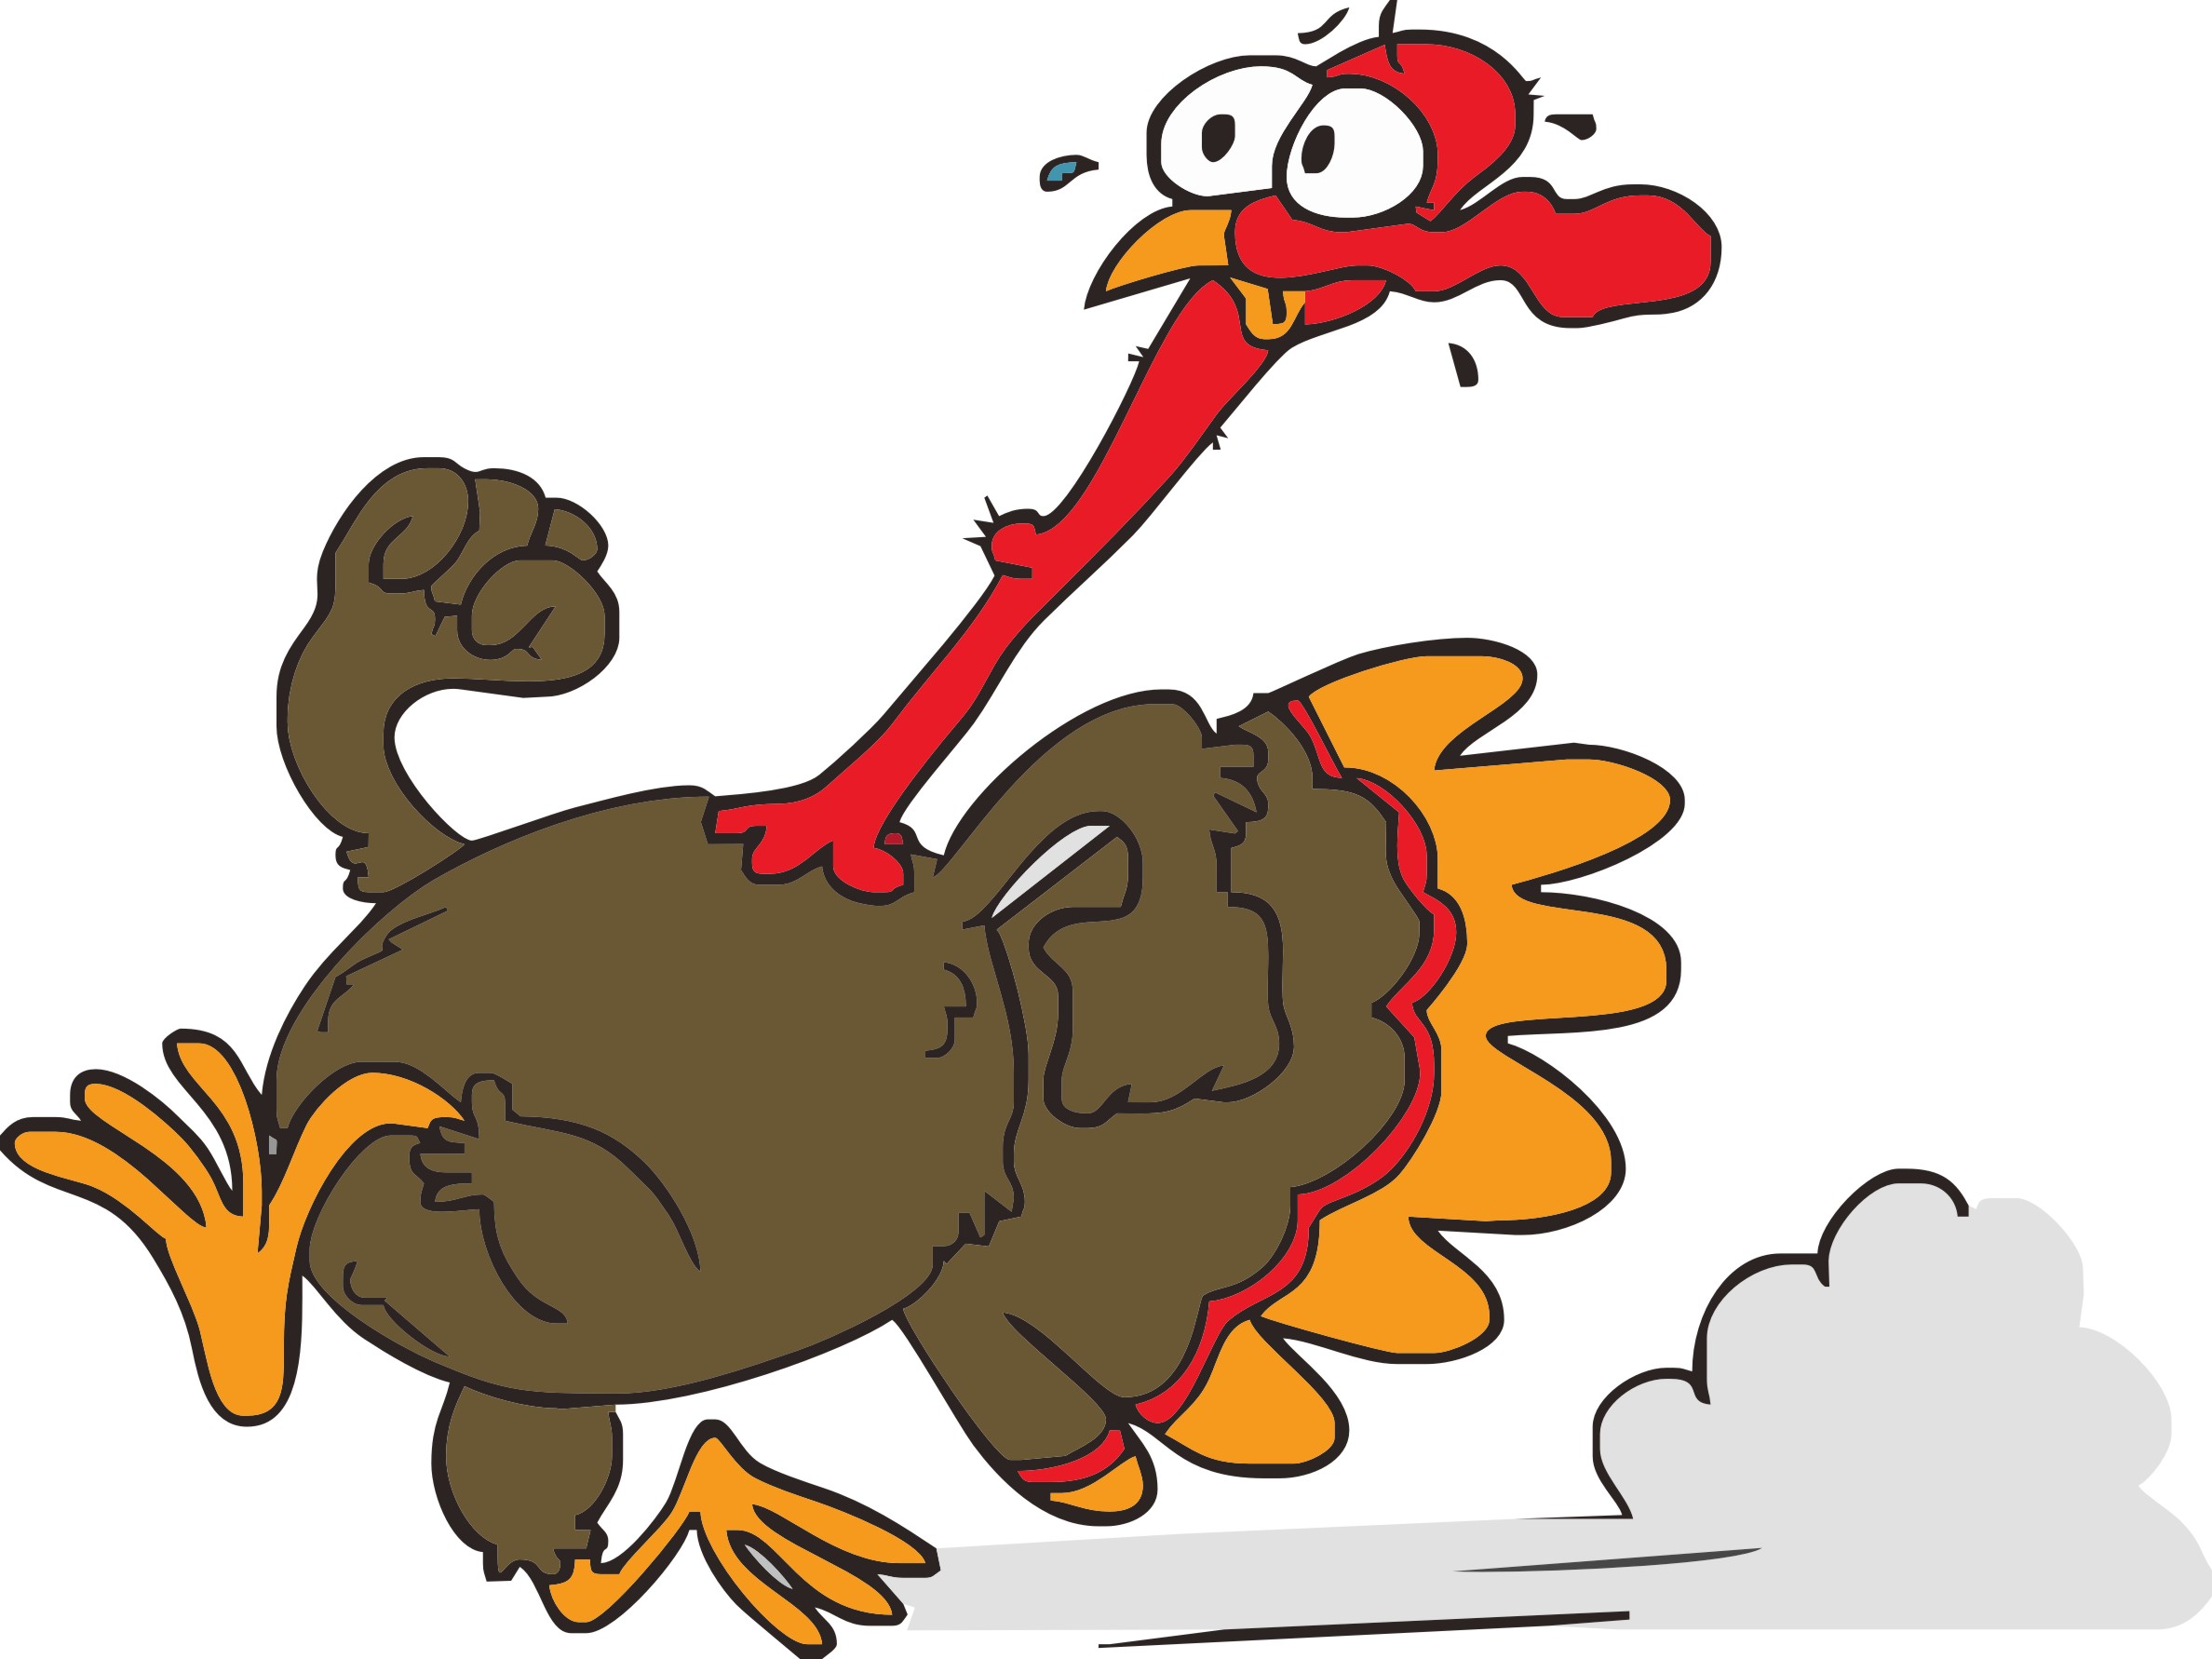 We Will Be Meeting For A Thanksgiving Morning Fun Run At Parfet Park